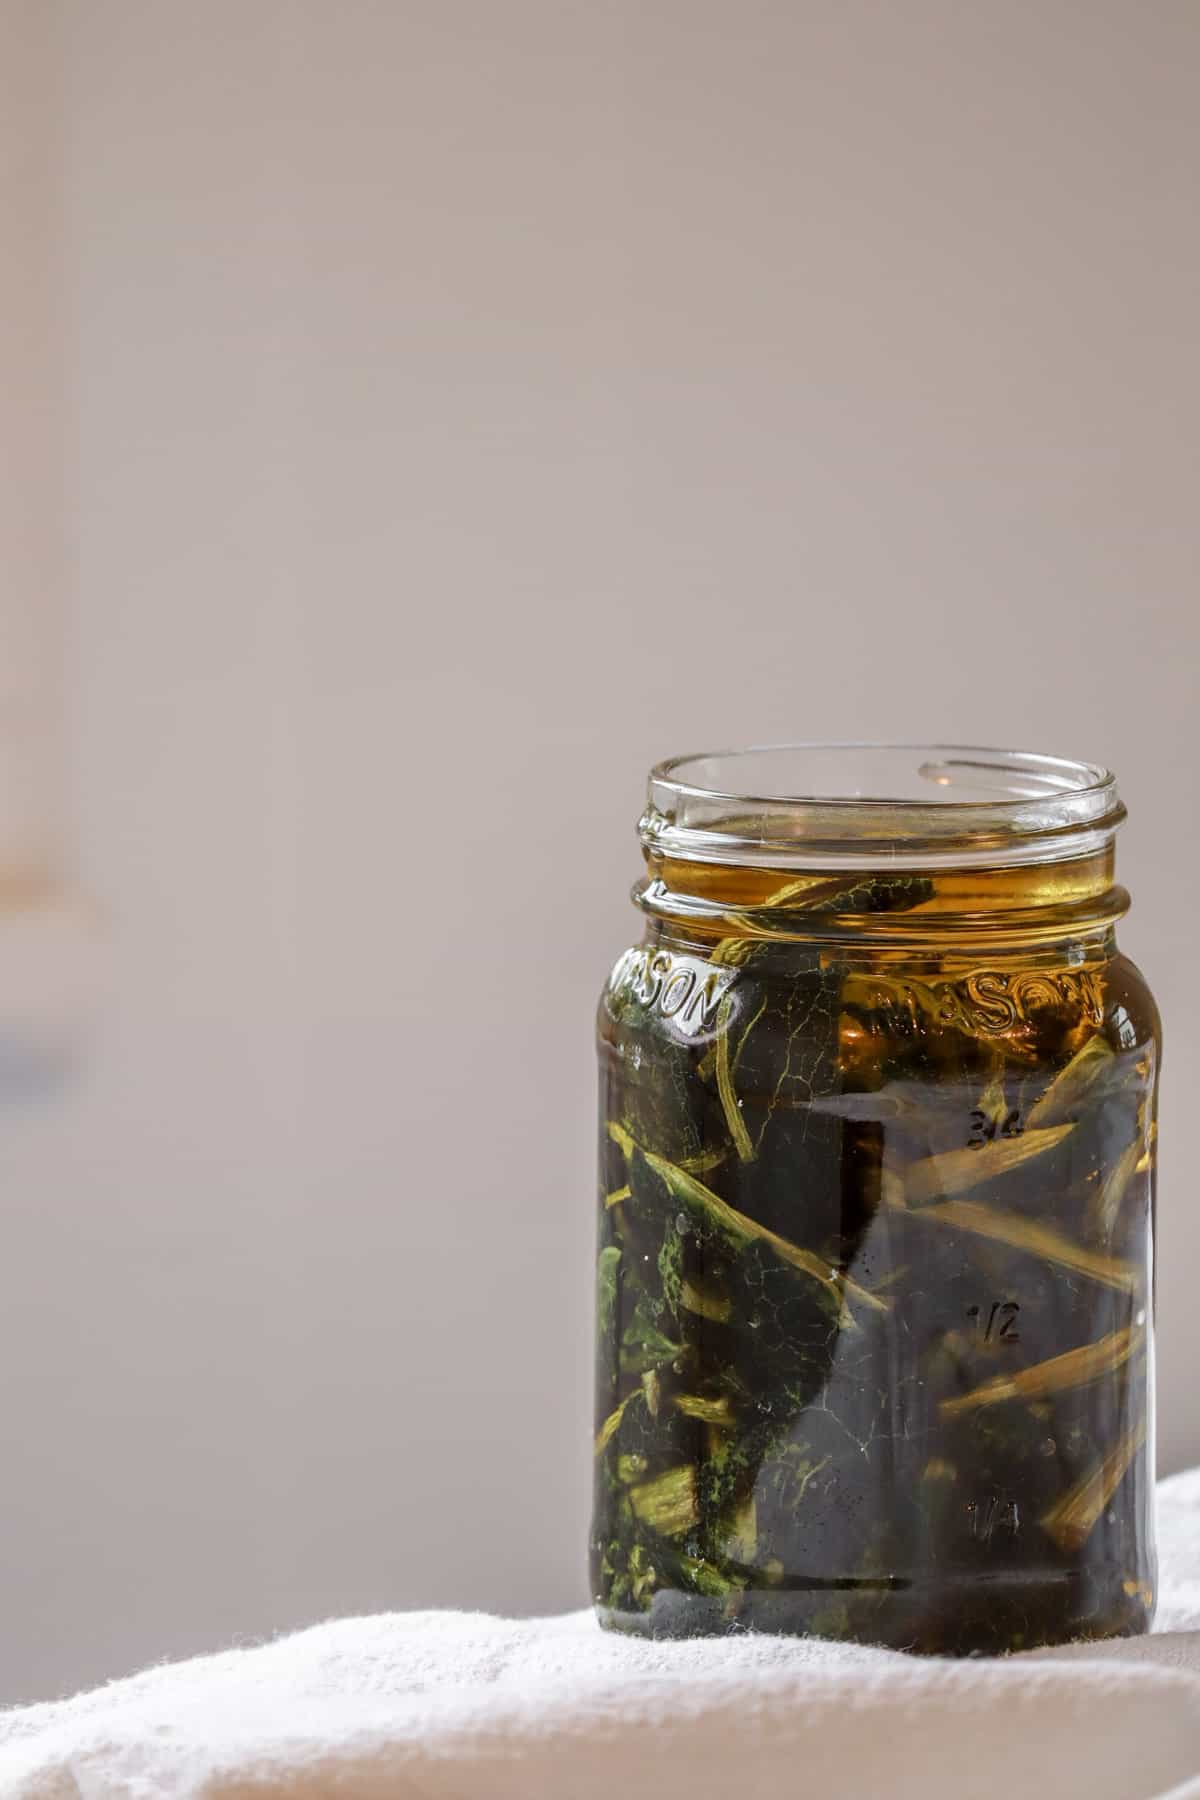 A mason jar of bright green comfrey leaves infusing in oil